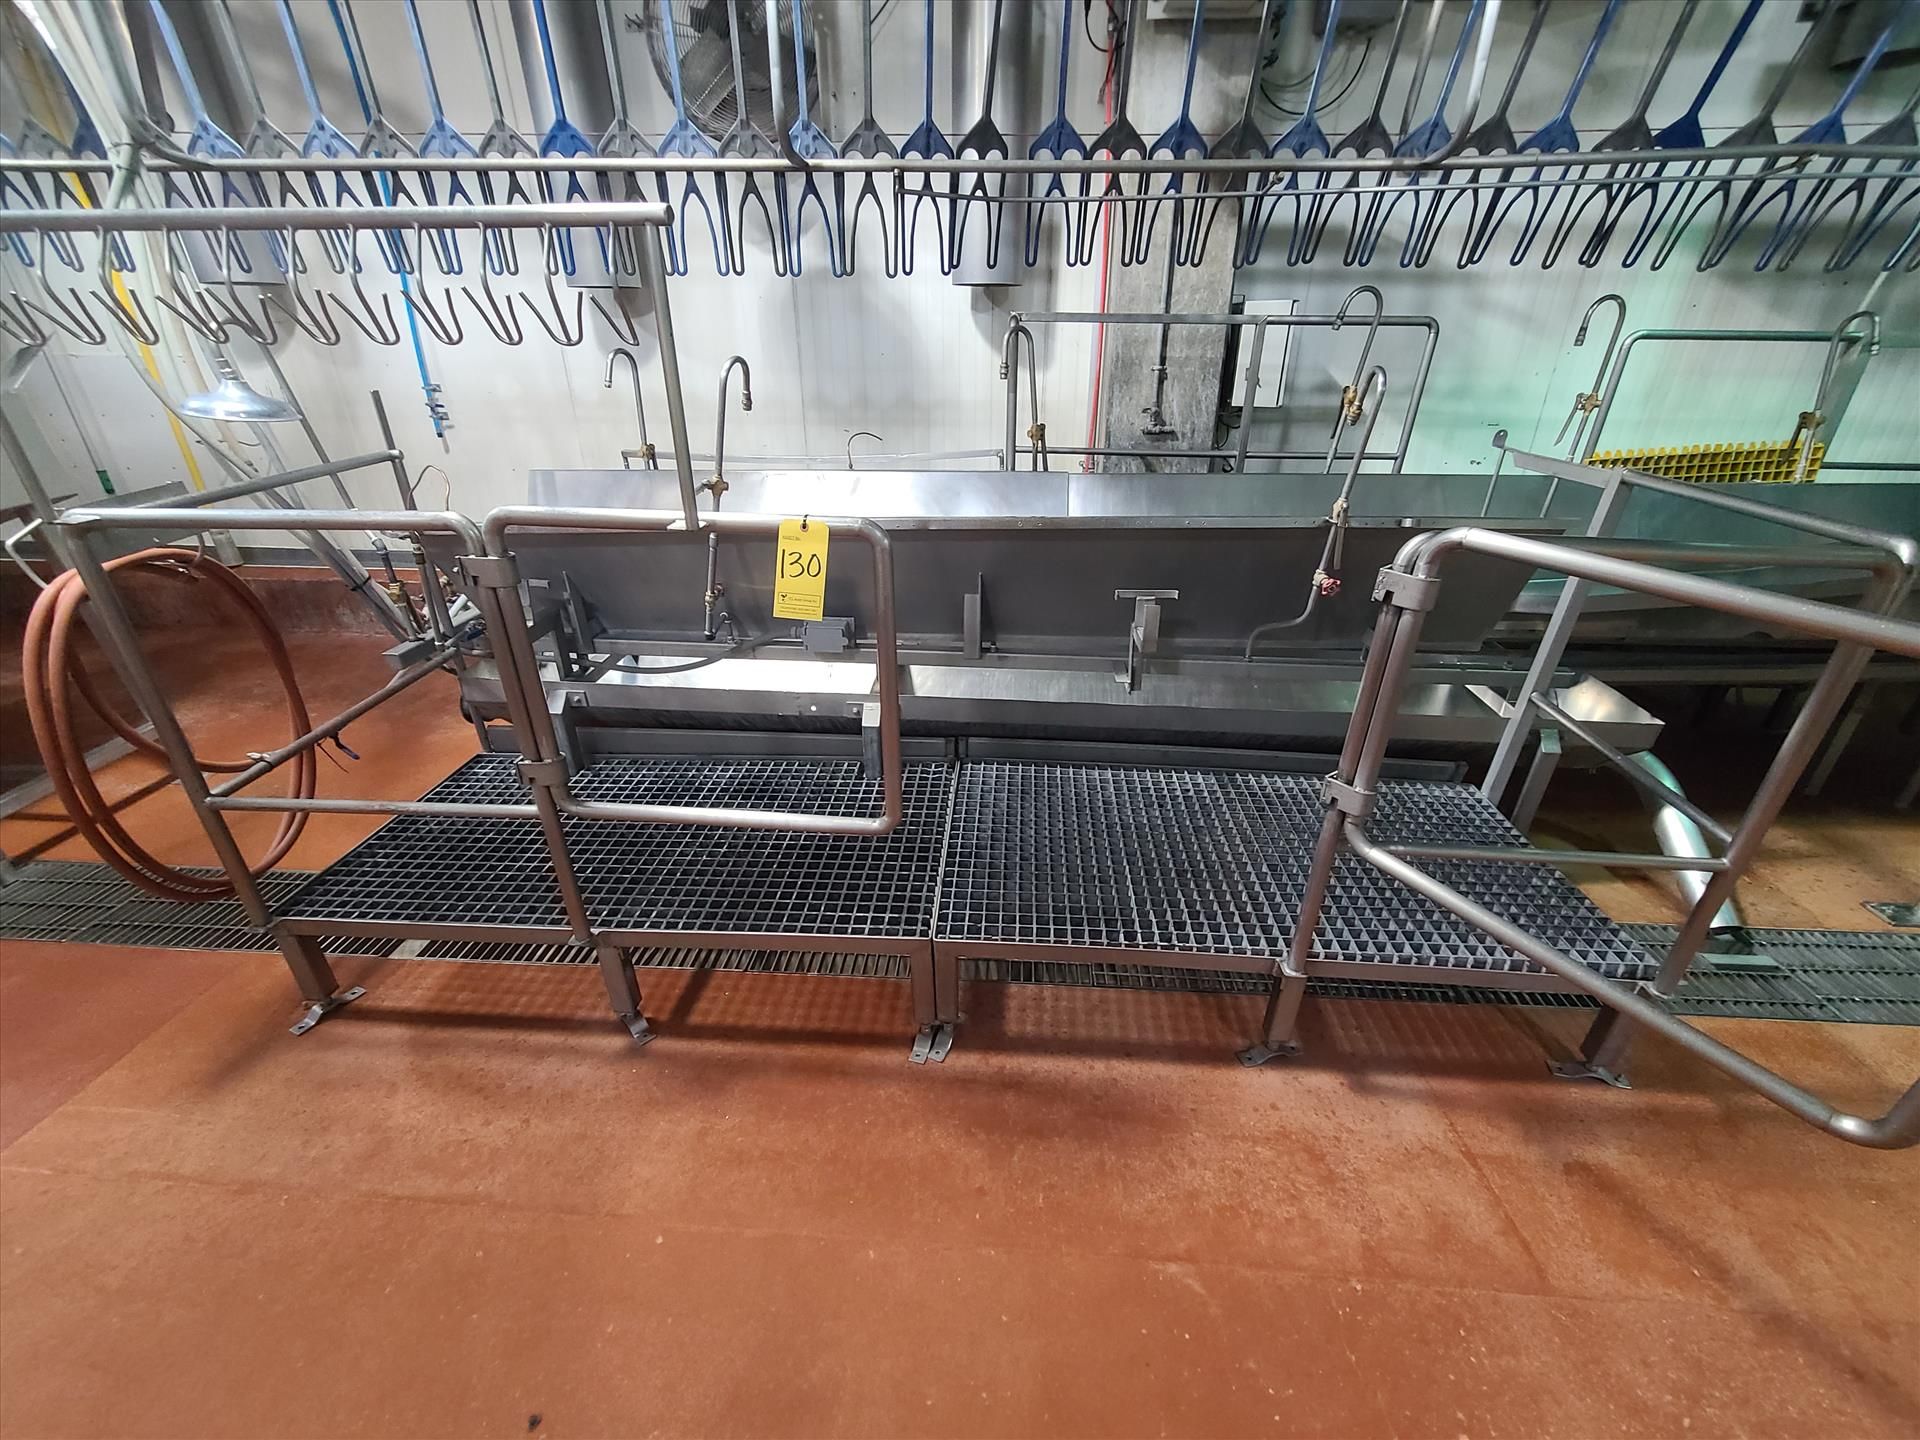 inspection station w/ trough, stainless steel, approx. 30 in. x 120 in. [Evisceration 2]